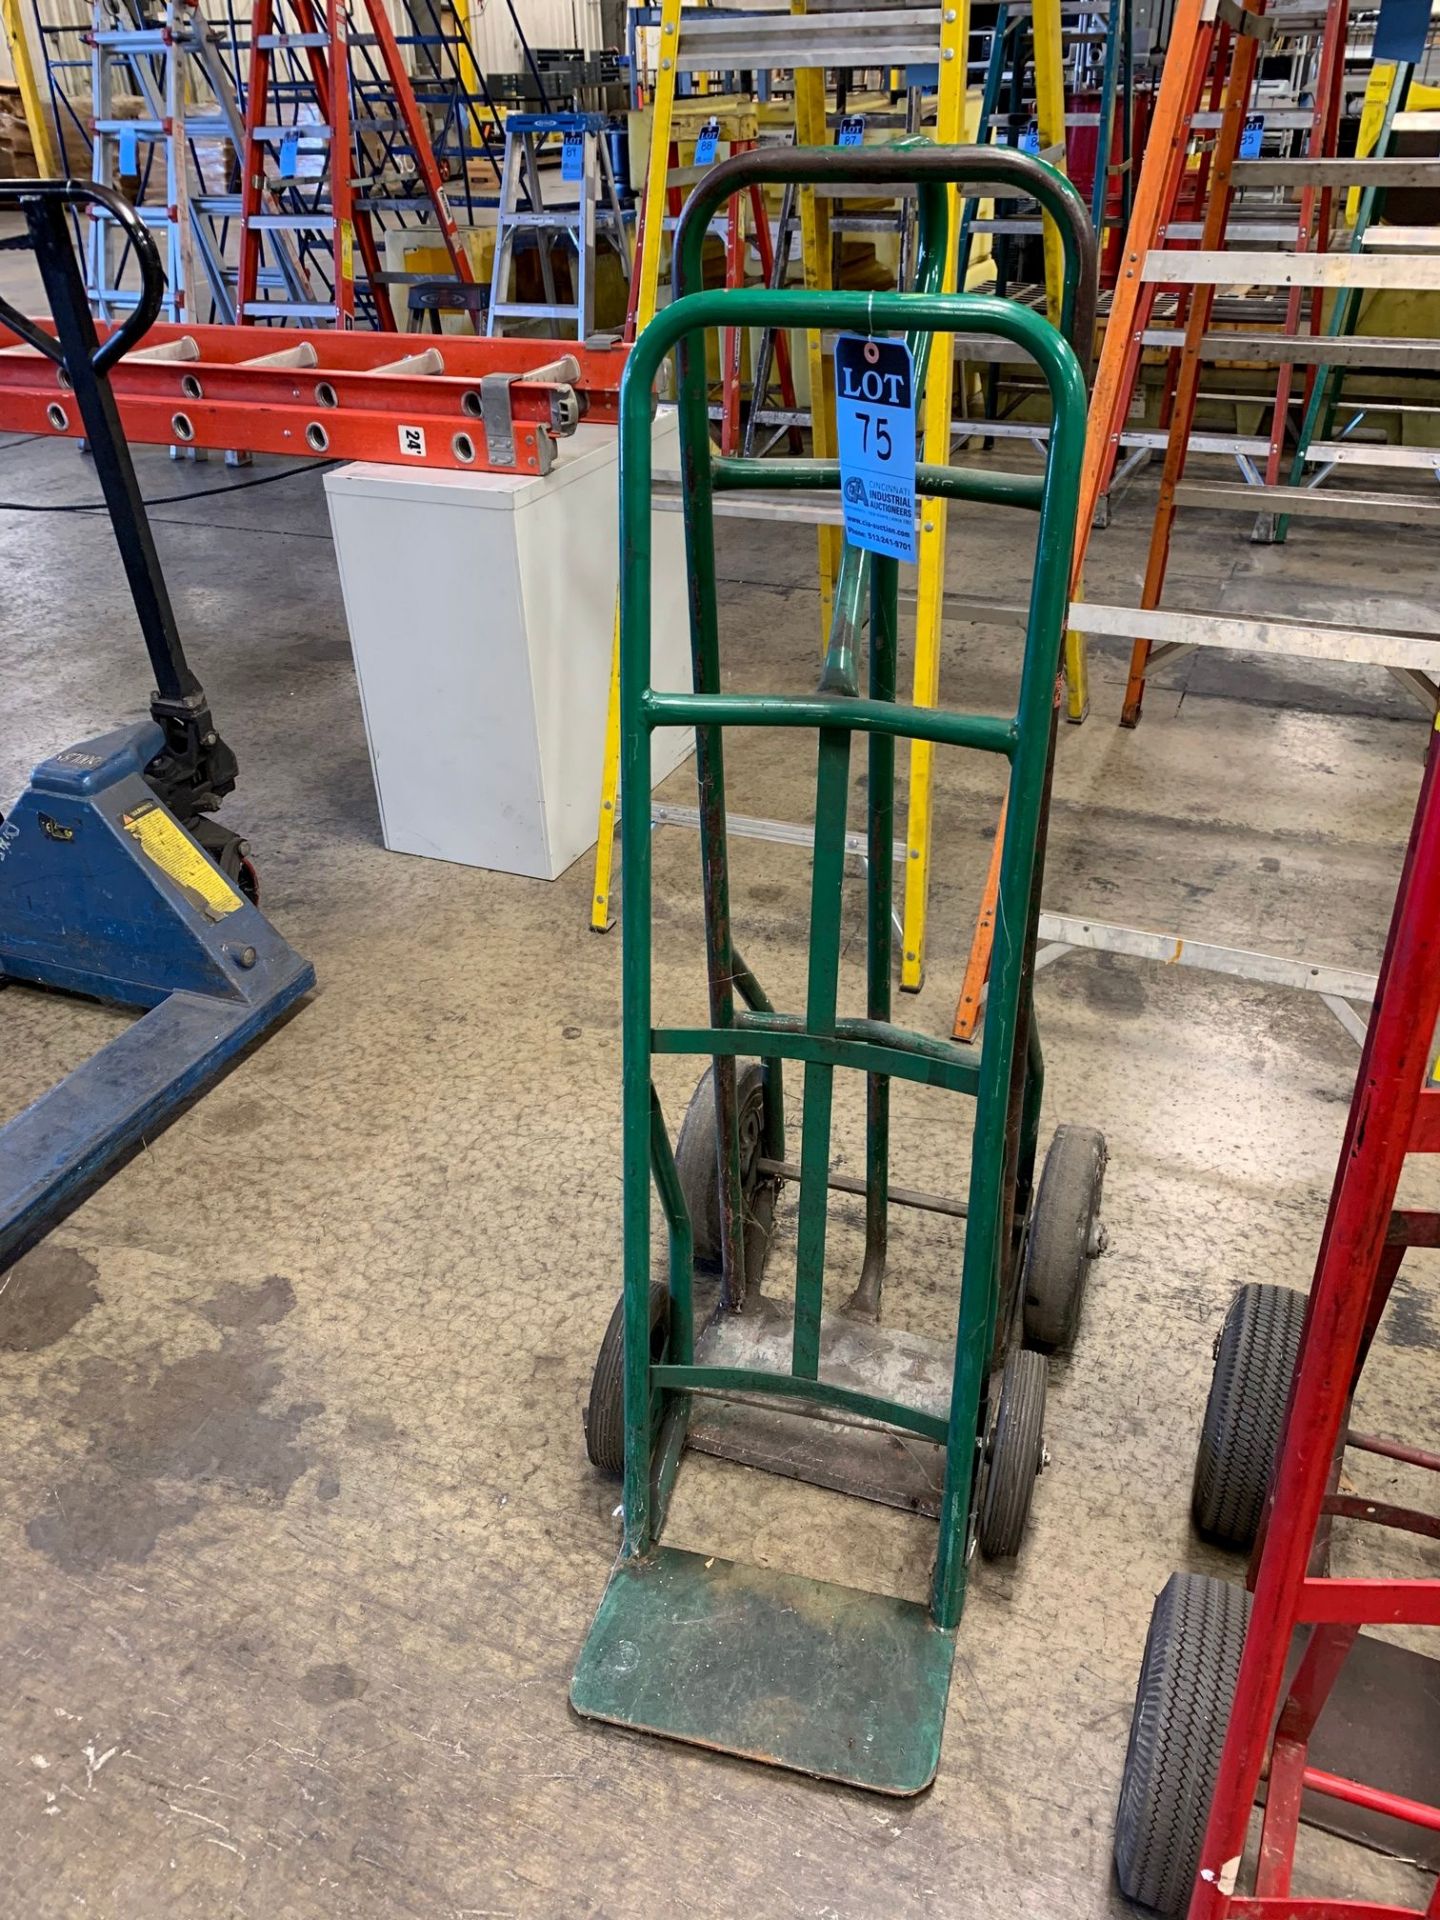 TWO-WHEEL SOLID TIRE HAND TRUCKS